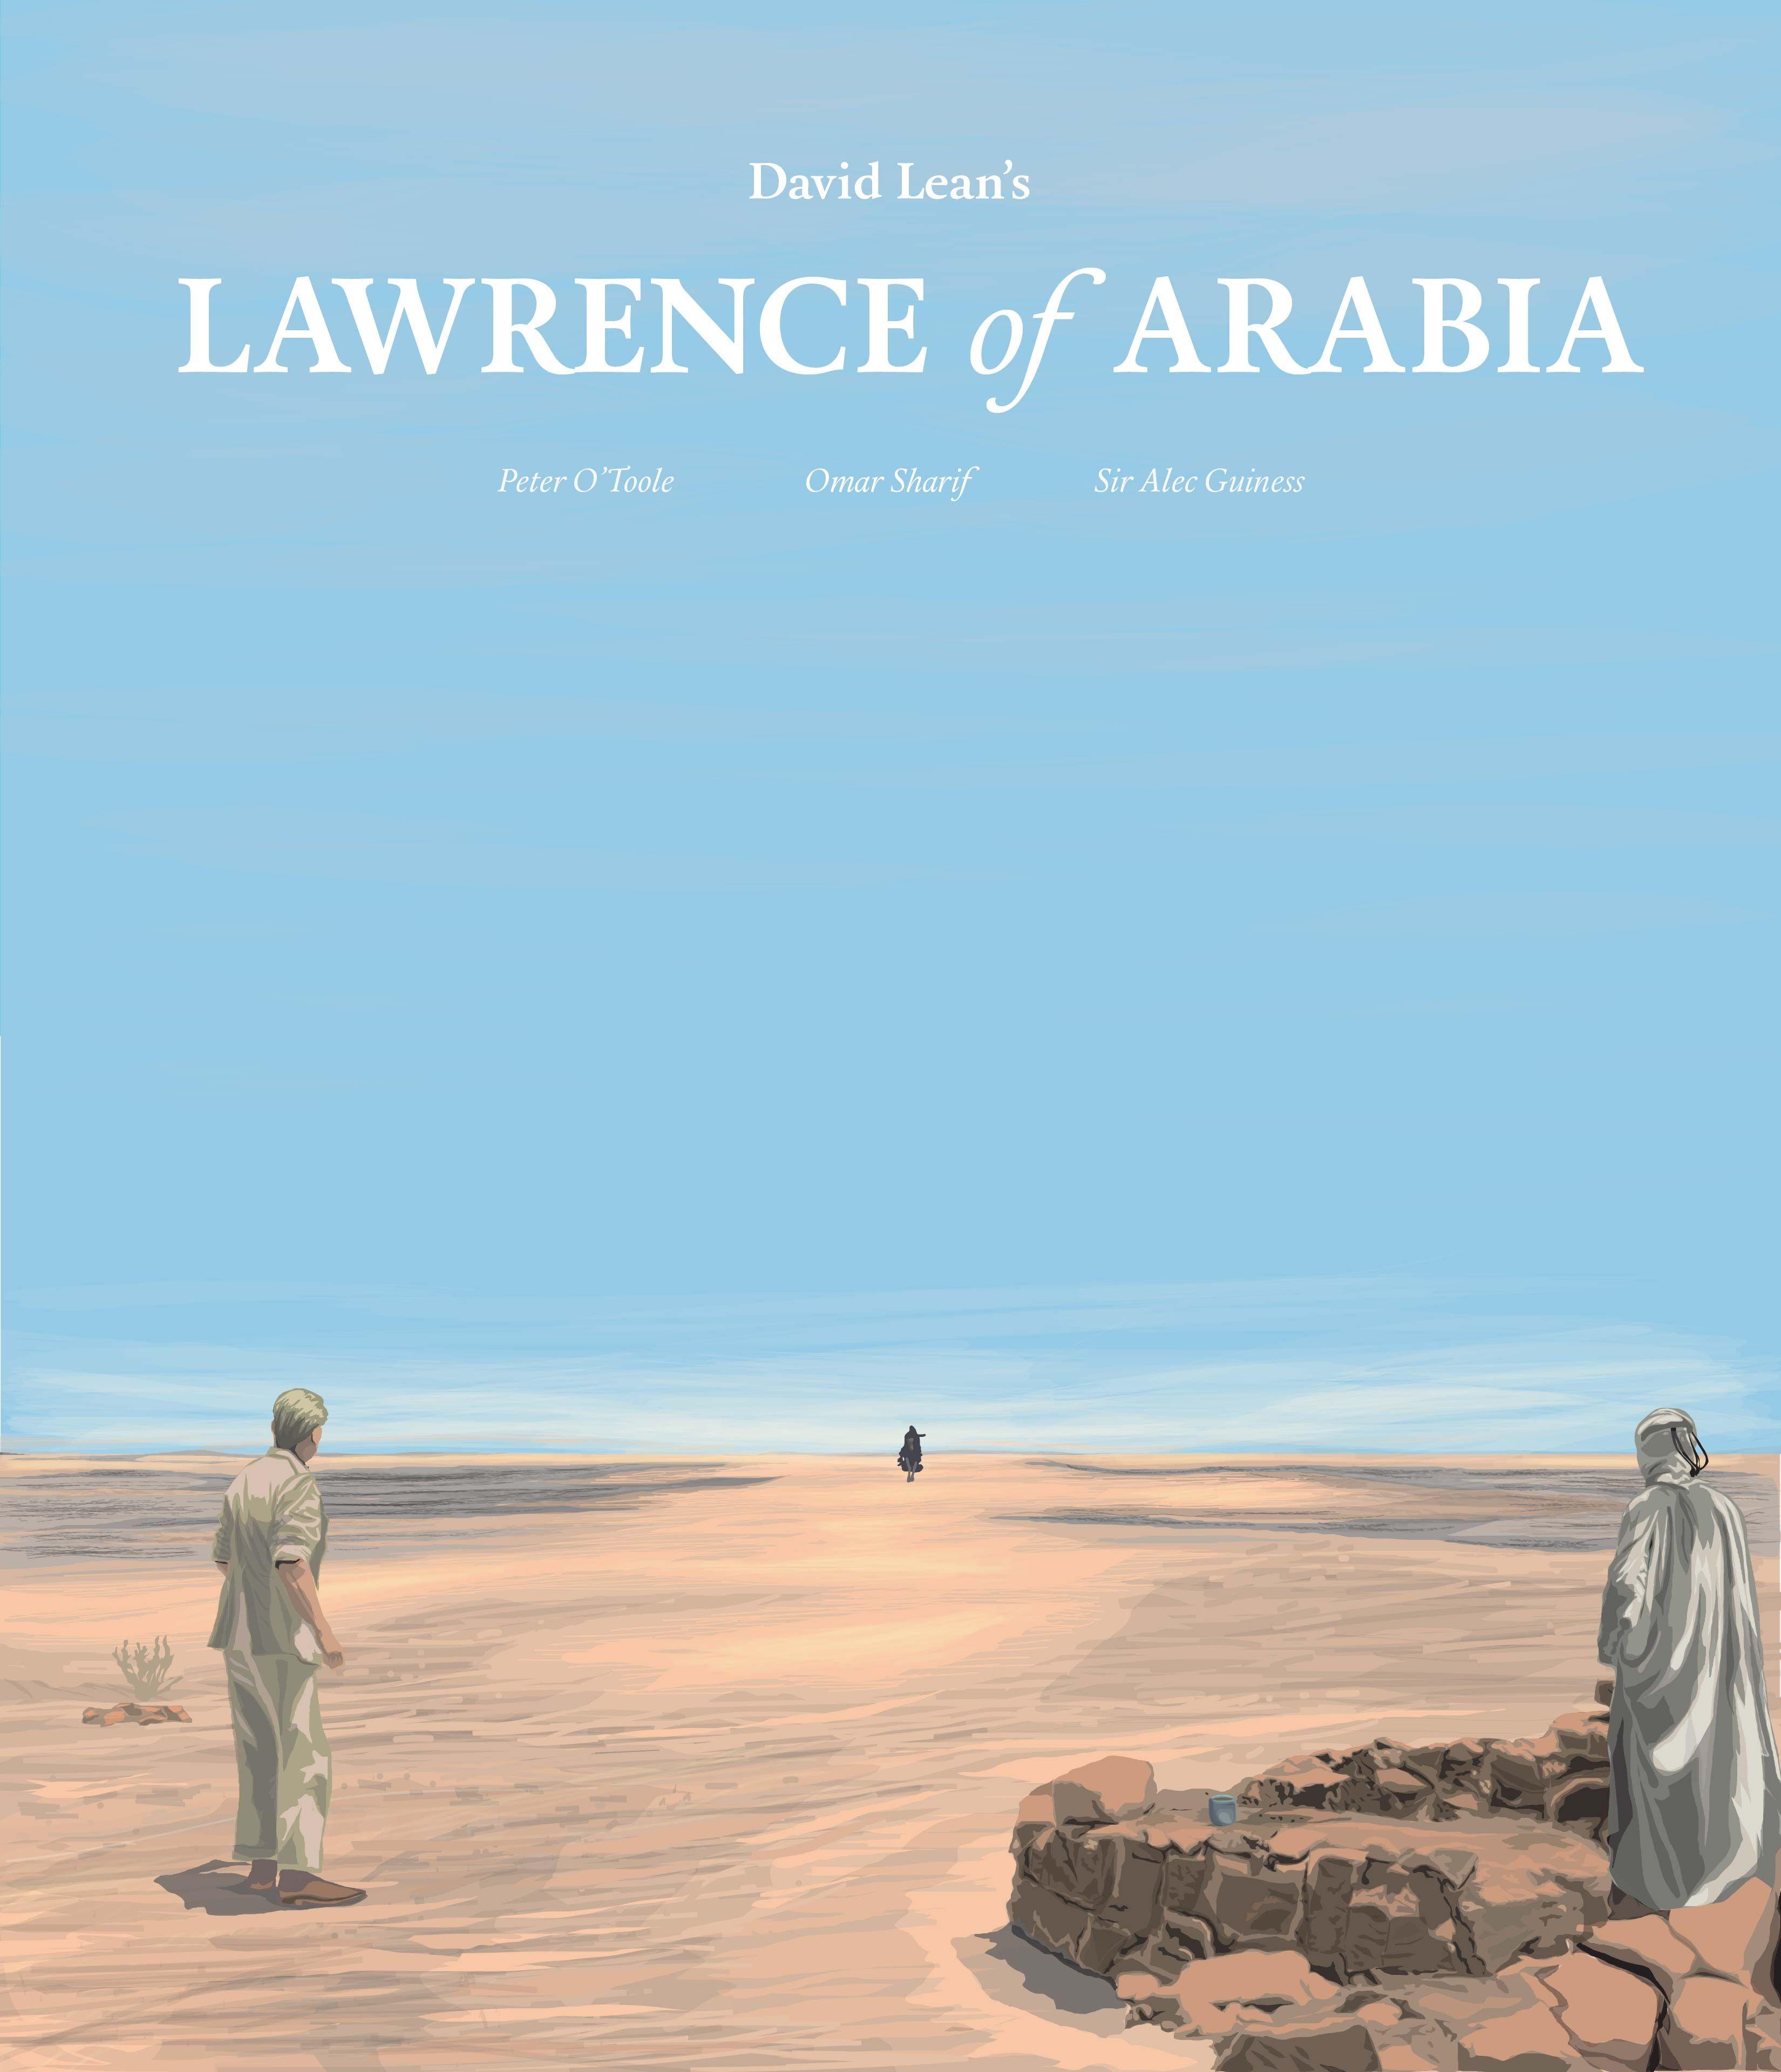 Lawrence Of Arabia Wallpapers